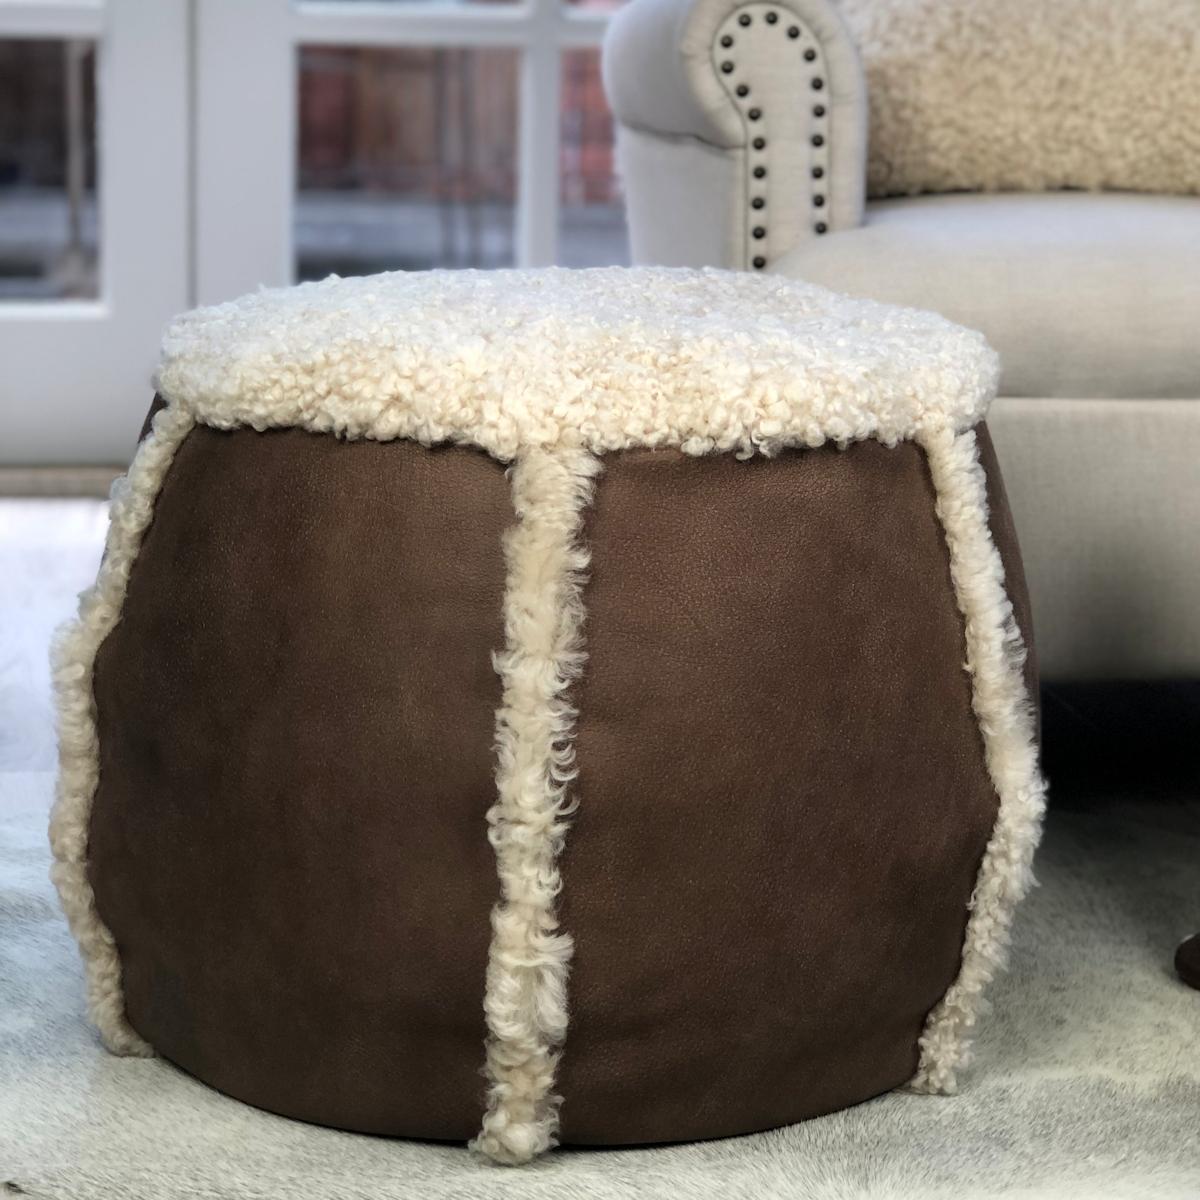 What a great way to add a stylish addition to your living room comfort with this brown leather pouf. Featuring an Italian grained leather trimmed with Australian curly wool shearling sheepskin complimenting the leather pouf's comfort